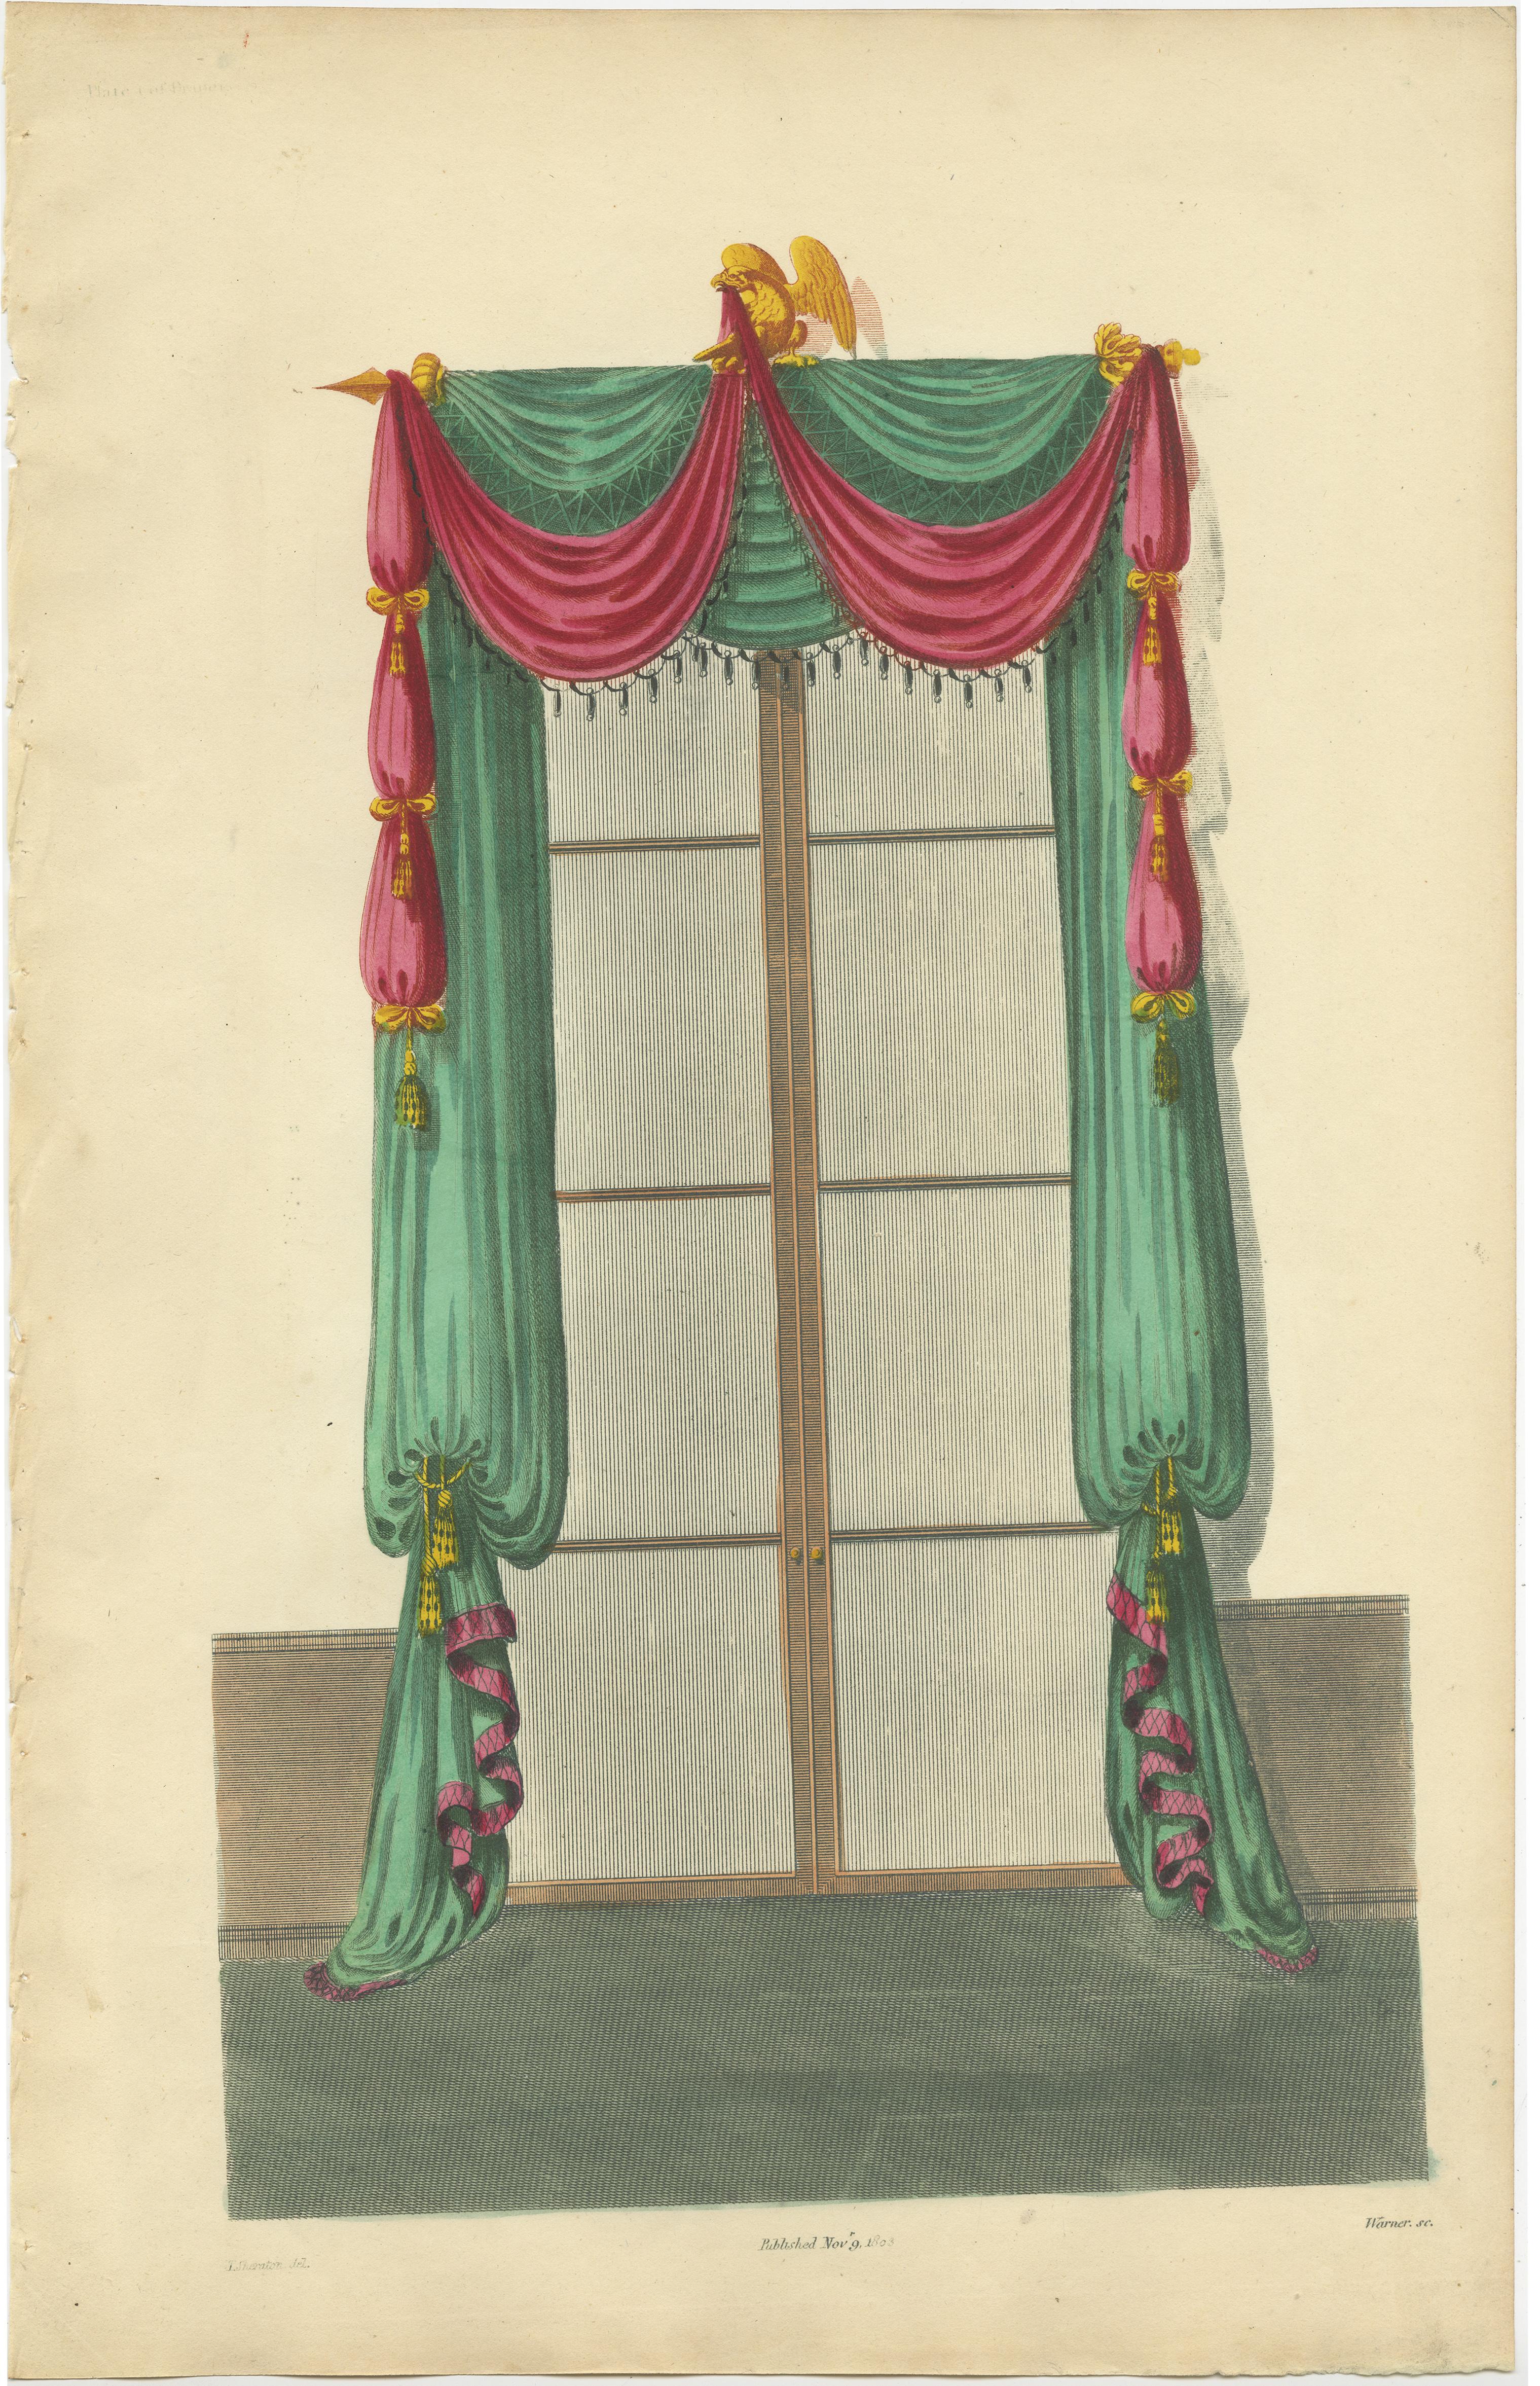 Set of four antique prints of windows with drapery. These prints originate from 'The General Artist's Encyclopaedia' by Thomas Sheraton. Published 1803-1805.